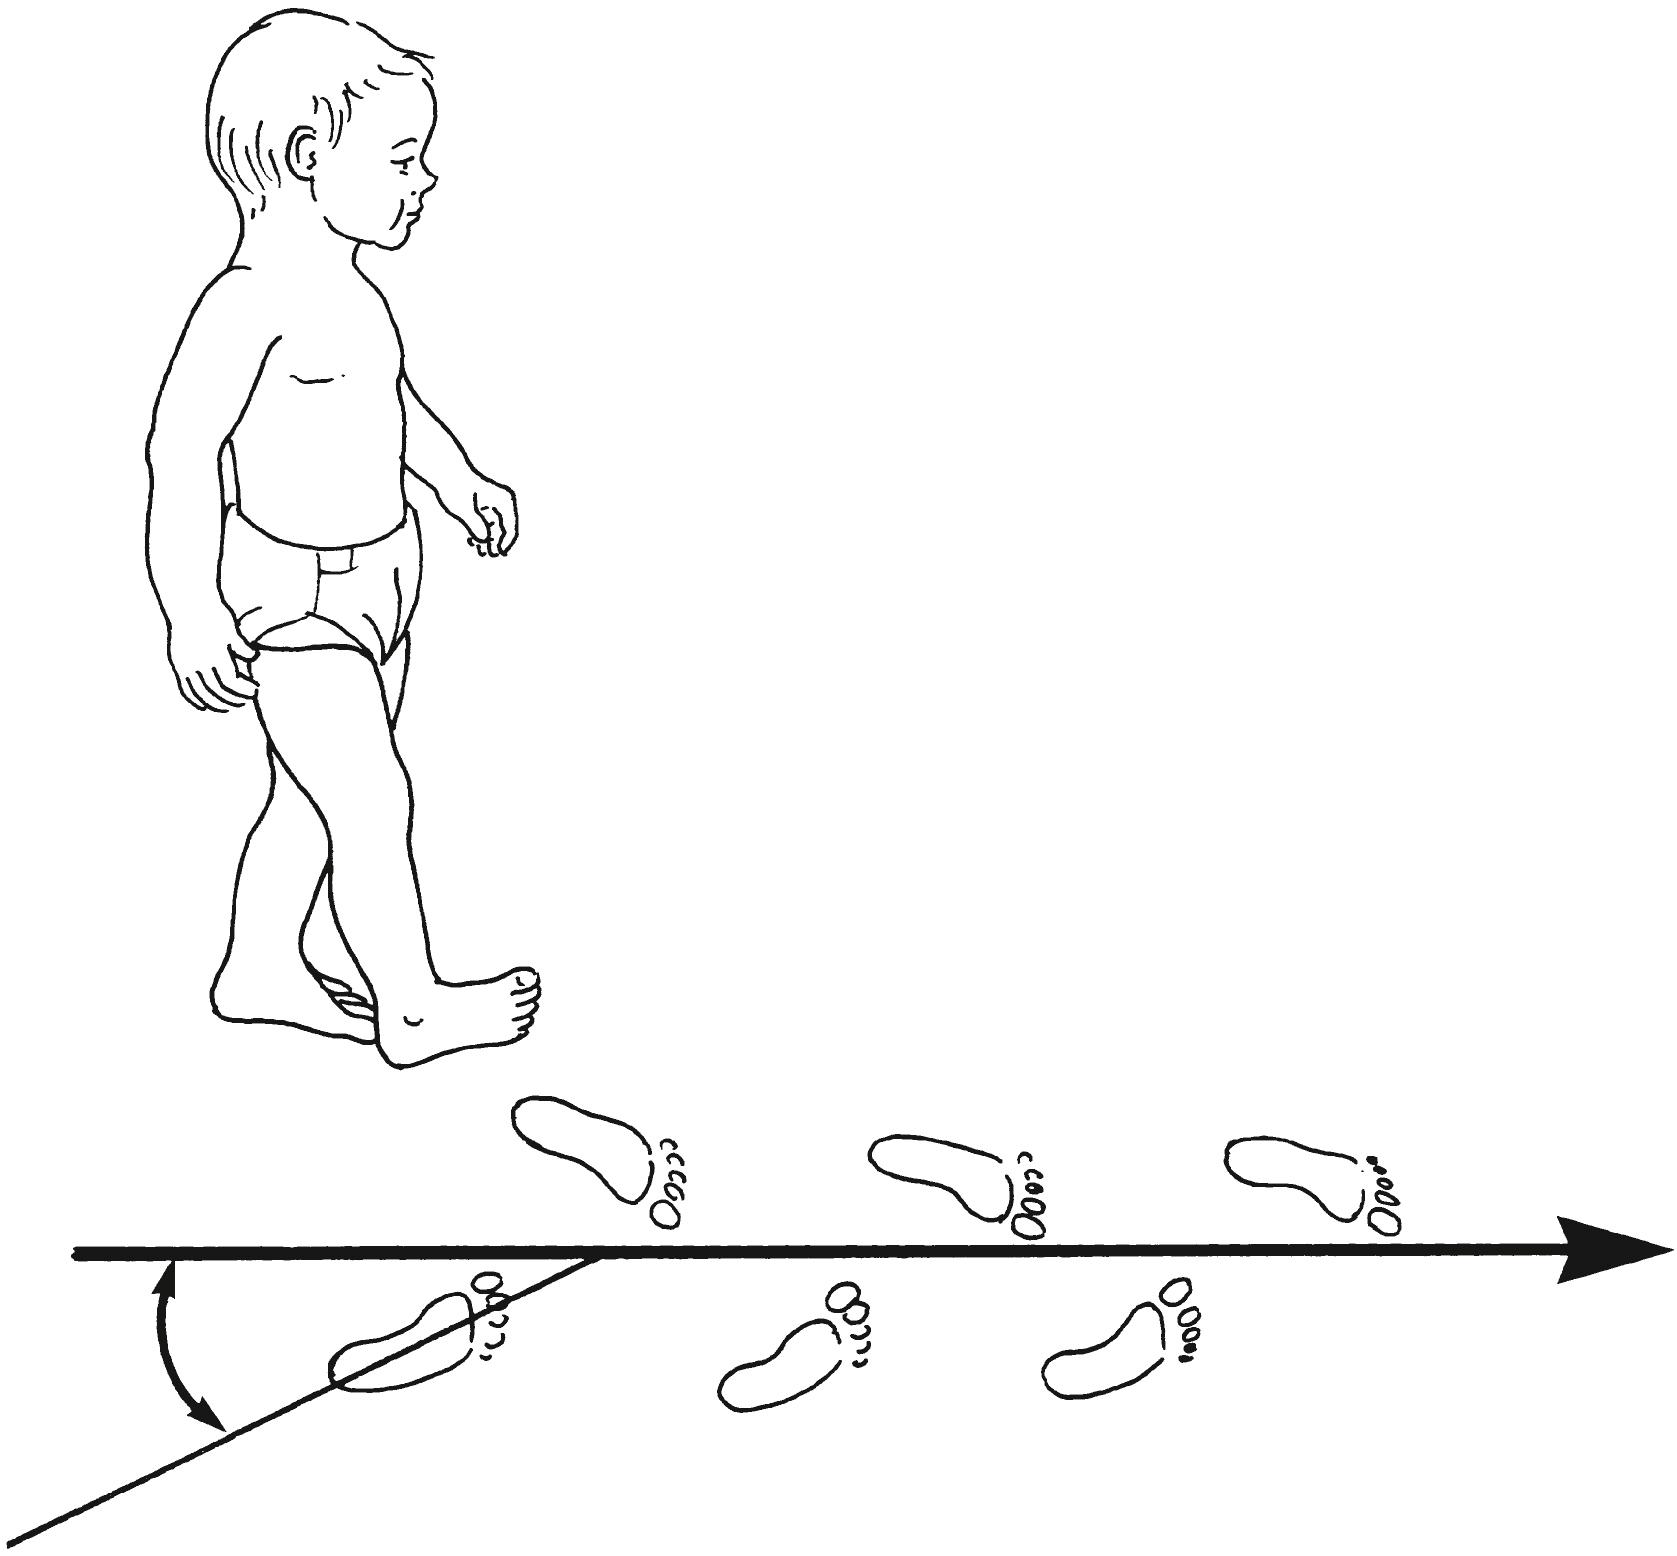 Fig. 45.3, Foot progression angle. The long axis of the foot is compared with the direction in which the child is walking. If the foot points outward, the angle is positive. If the foot points inward, the angle is negative.